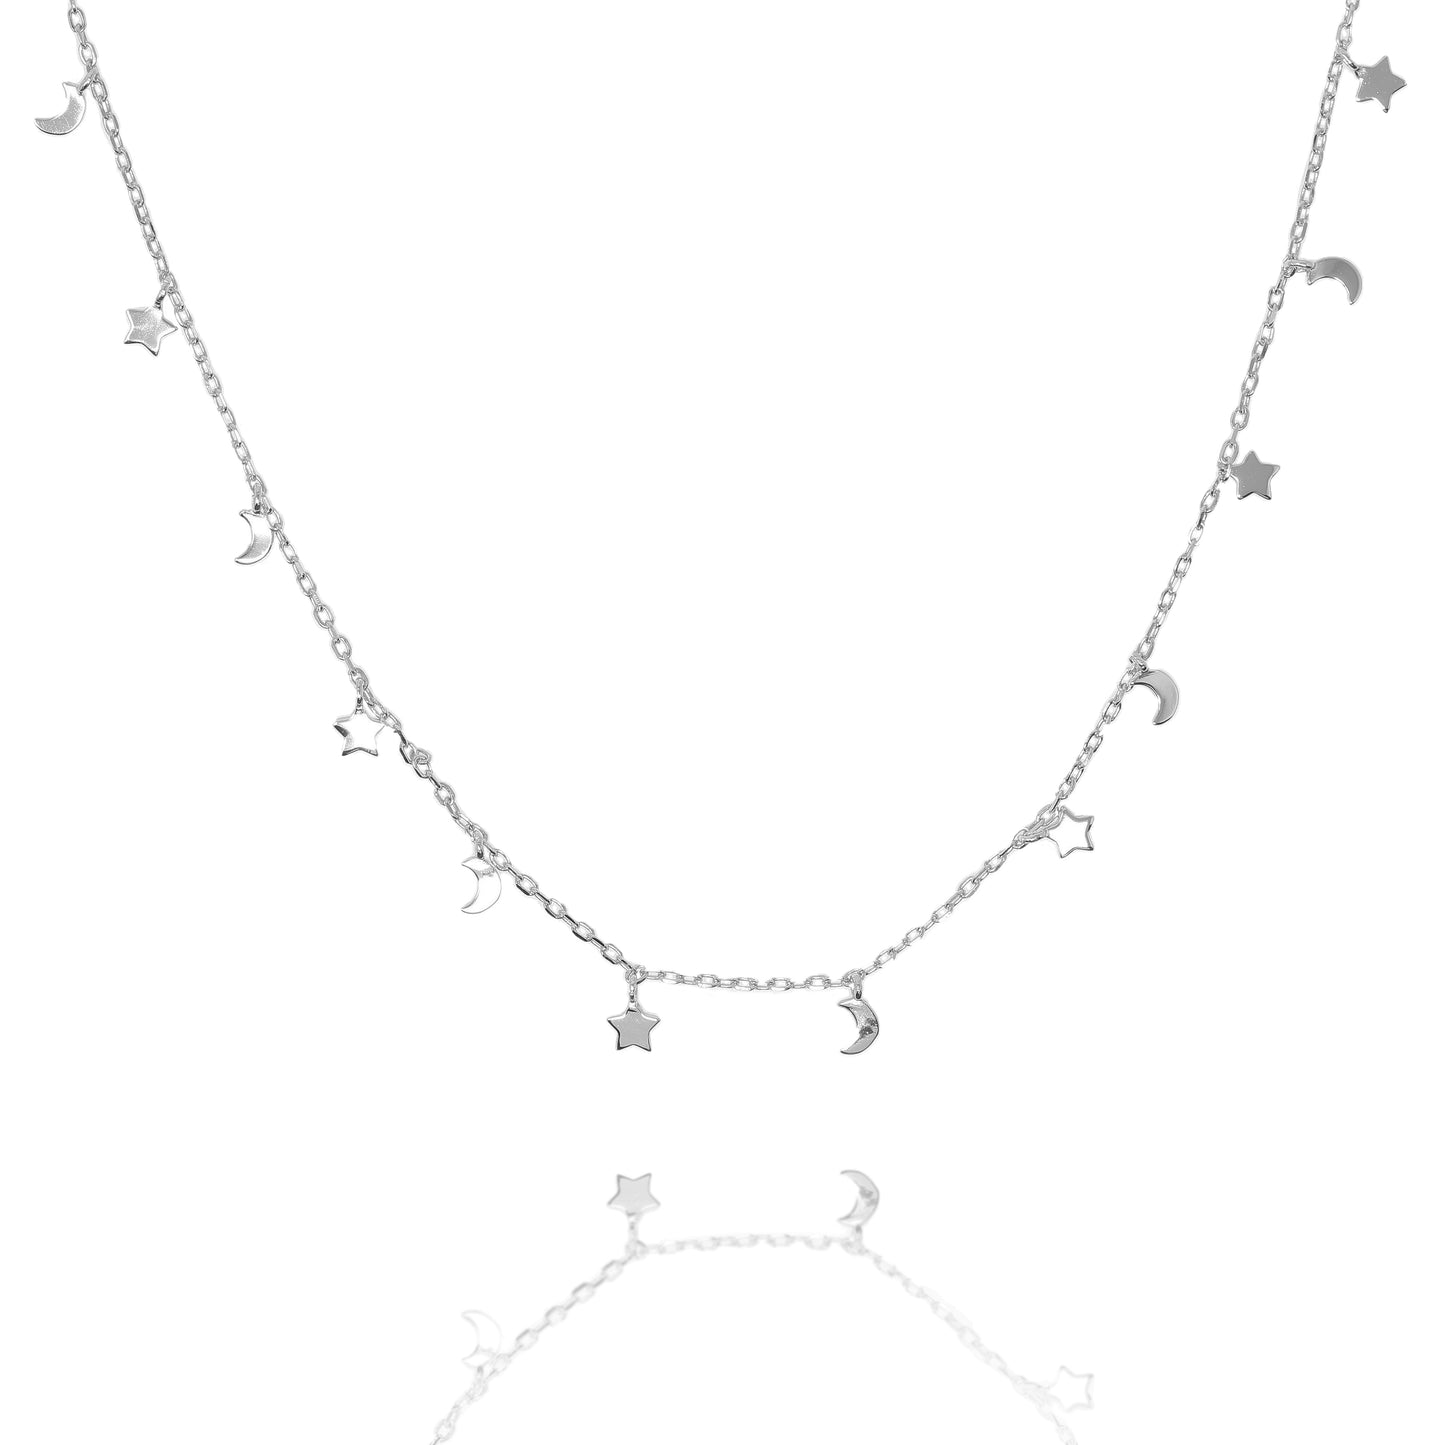 
Sterling silver chain necklace with hanging stars and moons.

